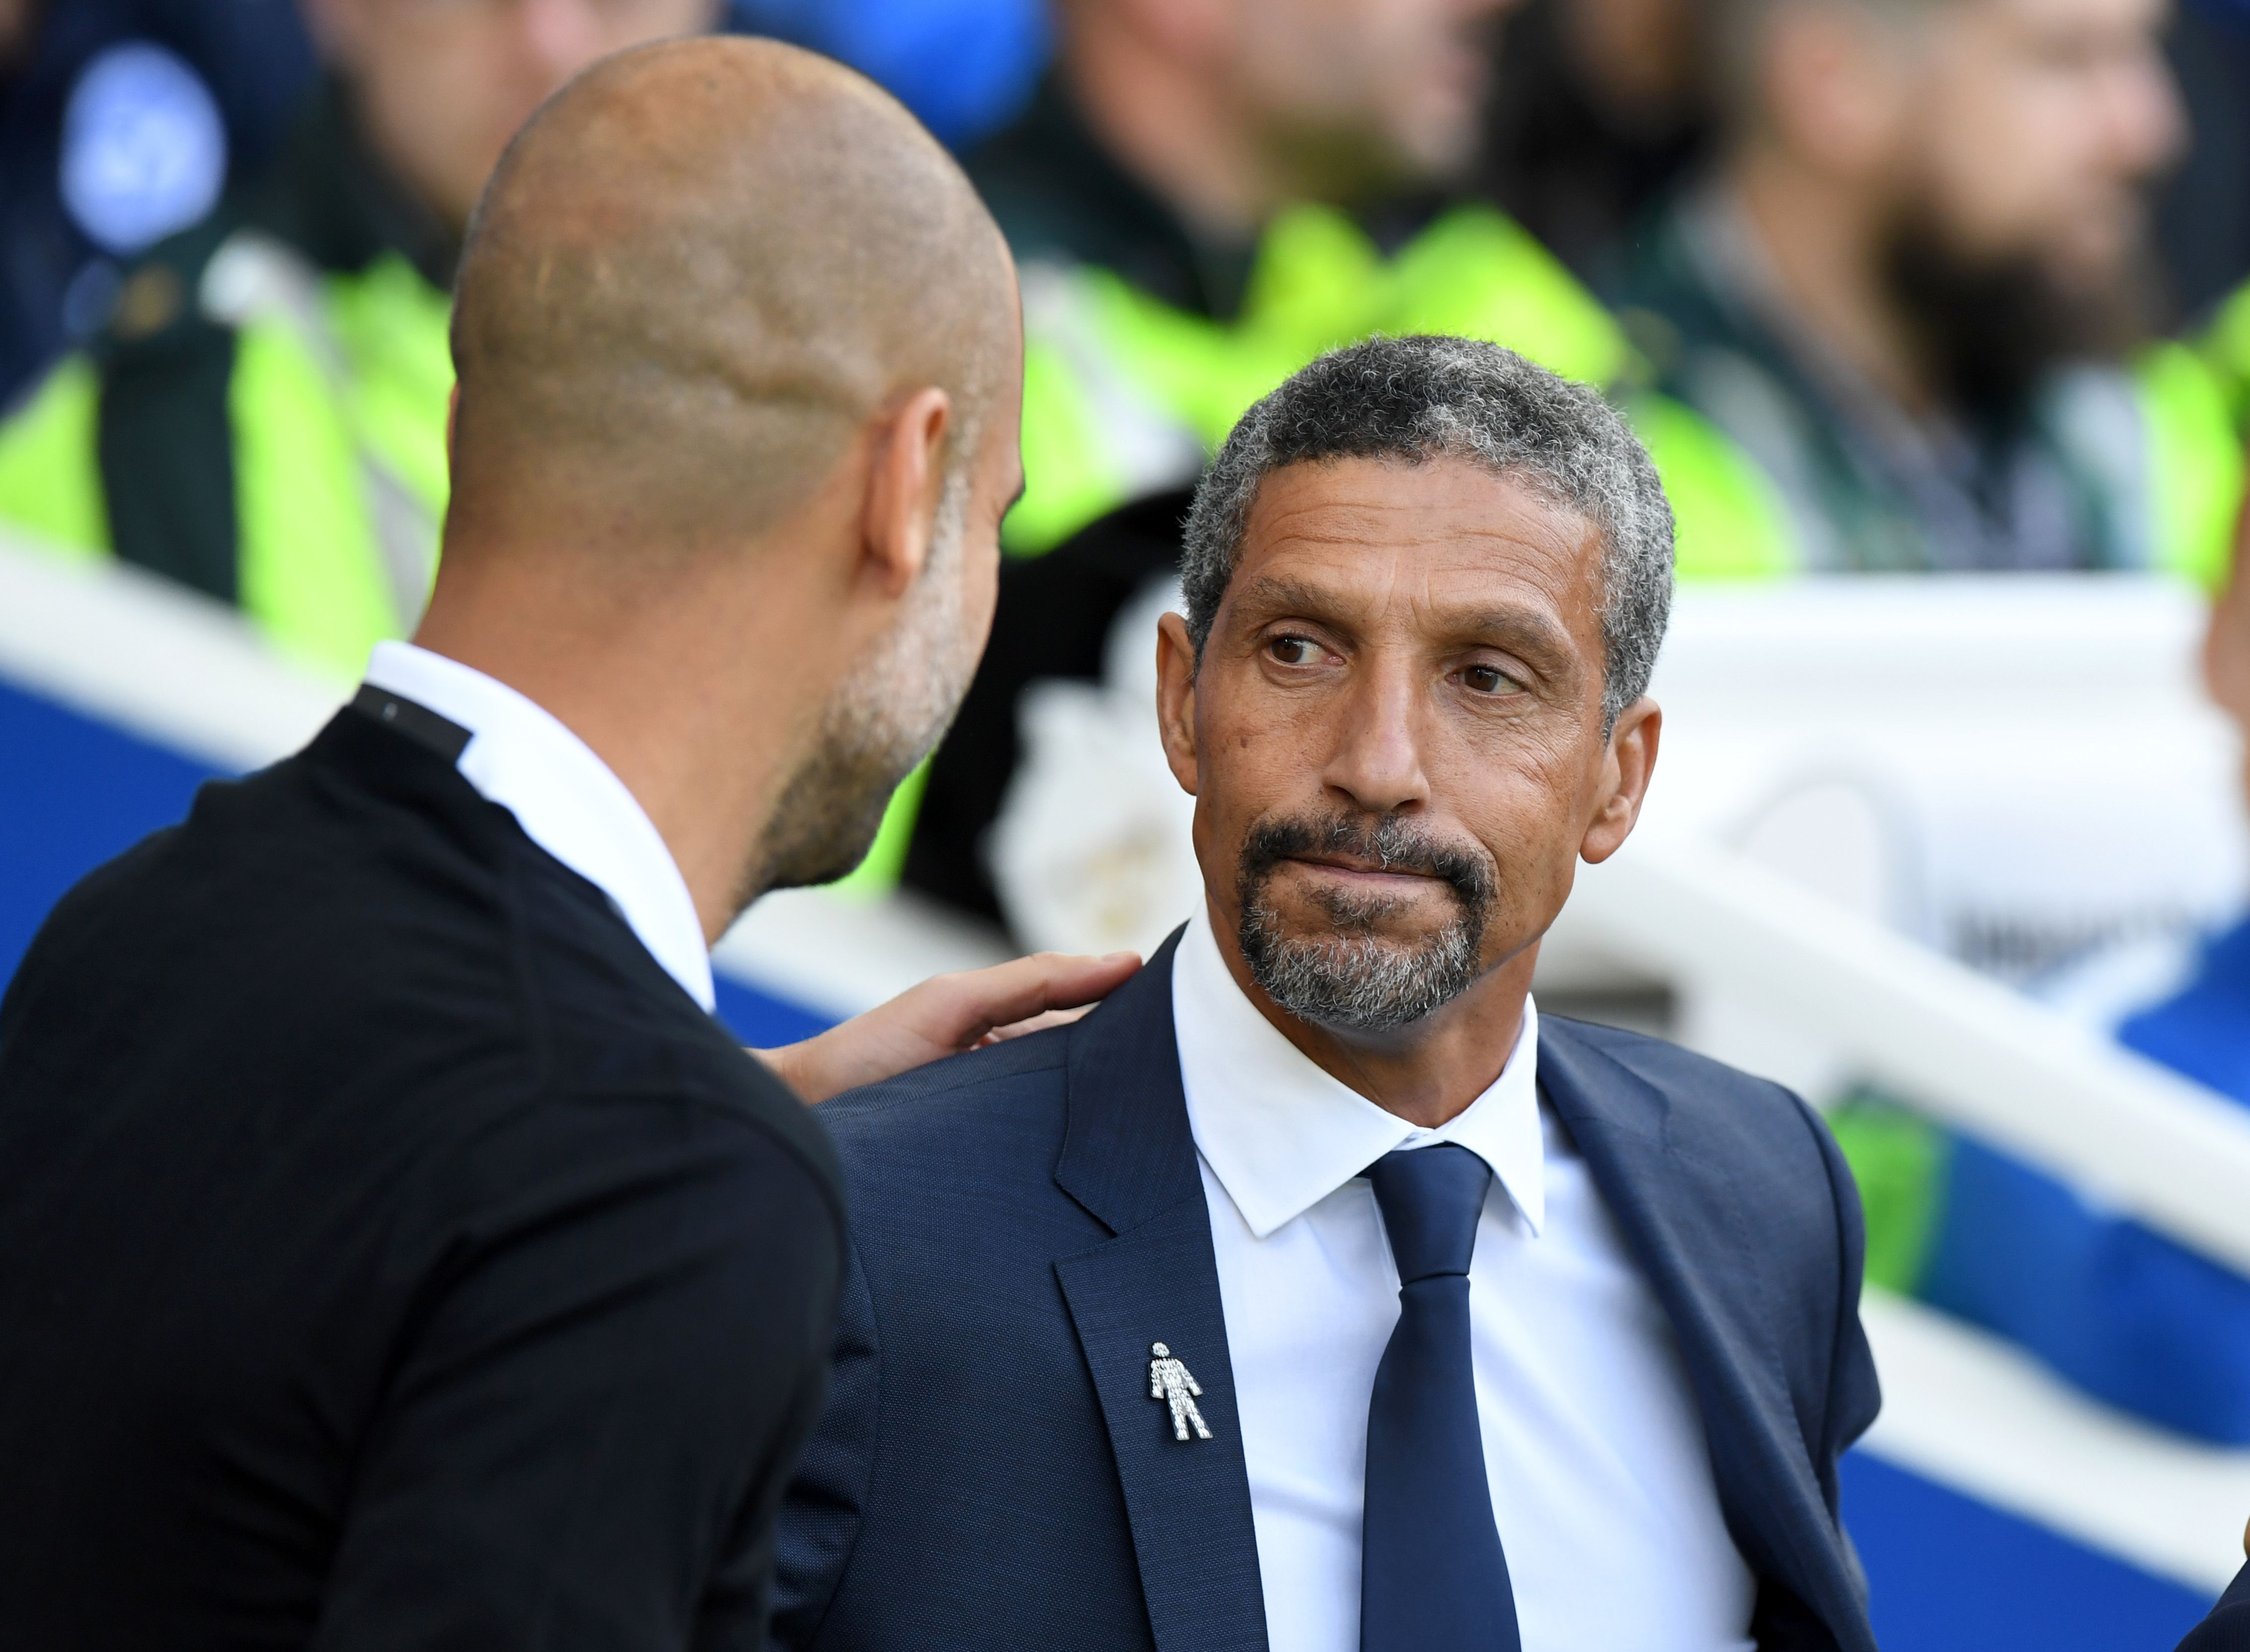 Brighton's Irish manager Chris Hughton (R) greets Manchester City's Spanish manager Pep Guardiola ahead of the English Premier League football match between Brighton and Hove Albion and Manchester City at the American Express Community Stadium in Brighton, southern England on August 12, 2017. / AFP PHOTO / CHRIS J RATCLIFFE / RESTRICTED TO EDITORIAL USE. No use with unauthorized audio, video, data, fixture lists, club/league logos or 'live' services. Online in-match use limited to 75 images, no video emulation. No use in betting, games or single club/league/player publications.  /         (Photo credit should read CHRIS J RATCLIFFE/AFP/Getty Images)